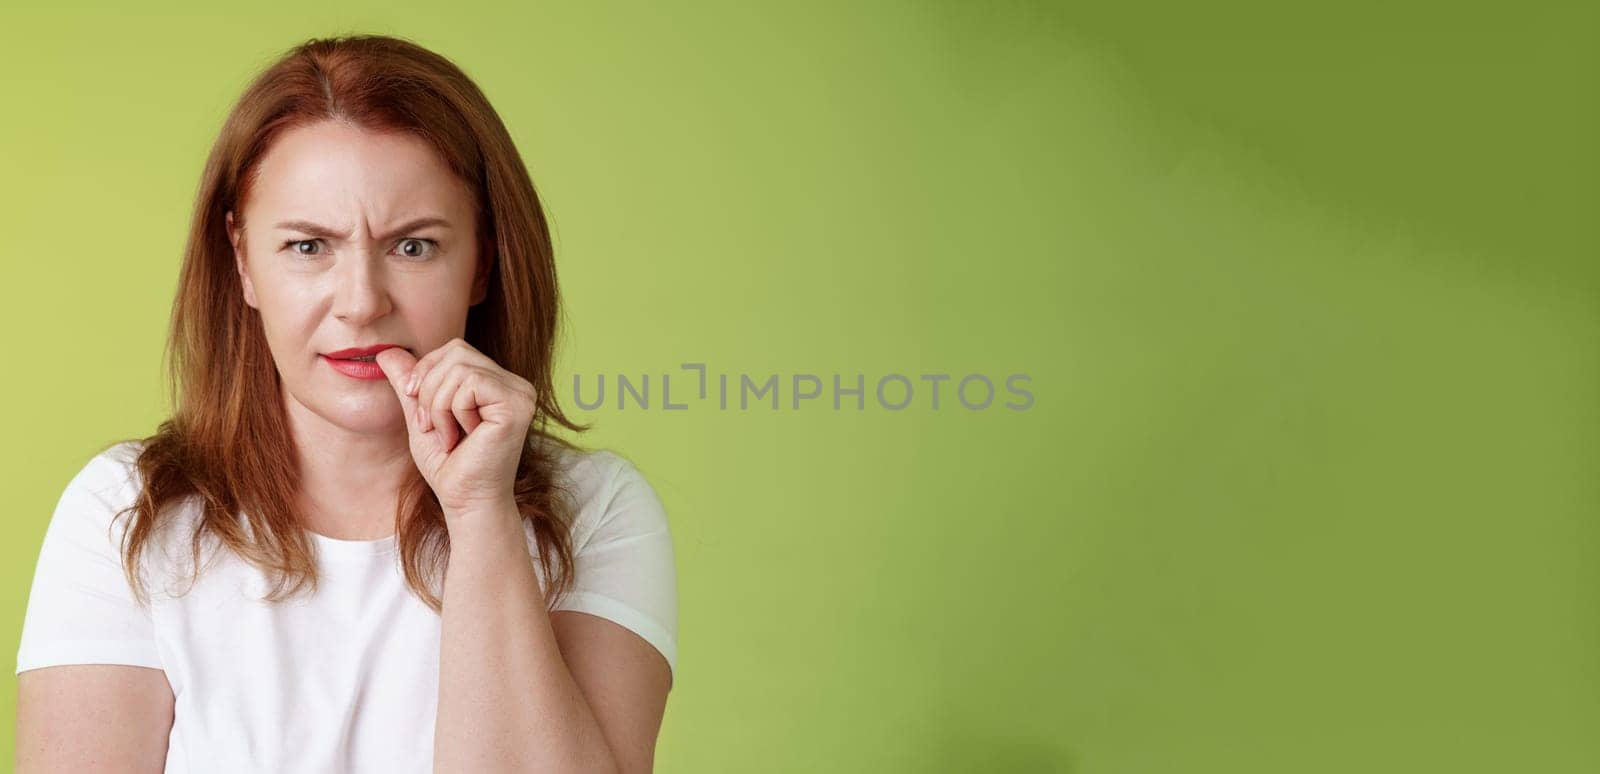 Confused puzzled redhead middle-aged mother perplexed look troubled solving troublesome situation pondering solution biting thumb nail frowning intense stare camera thinking thoughtfully.